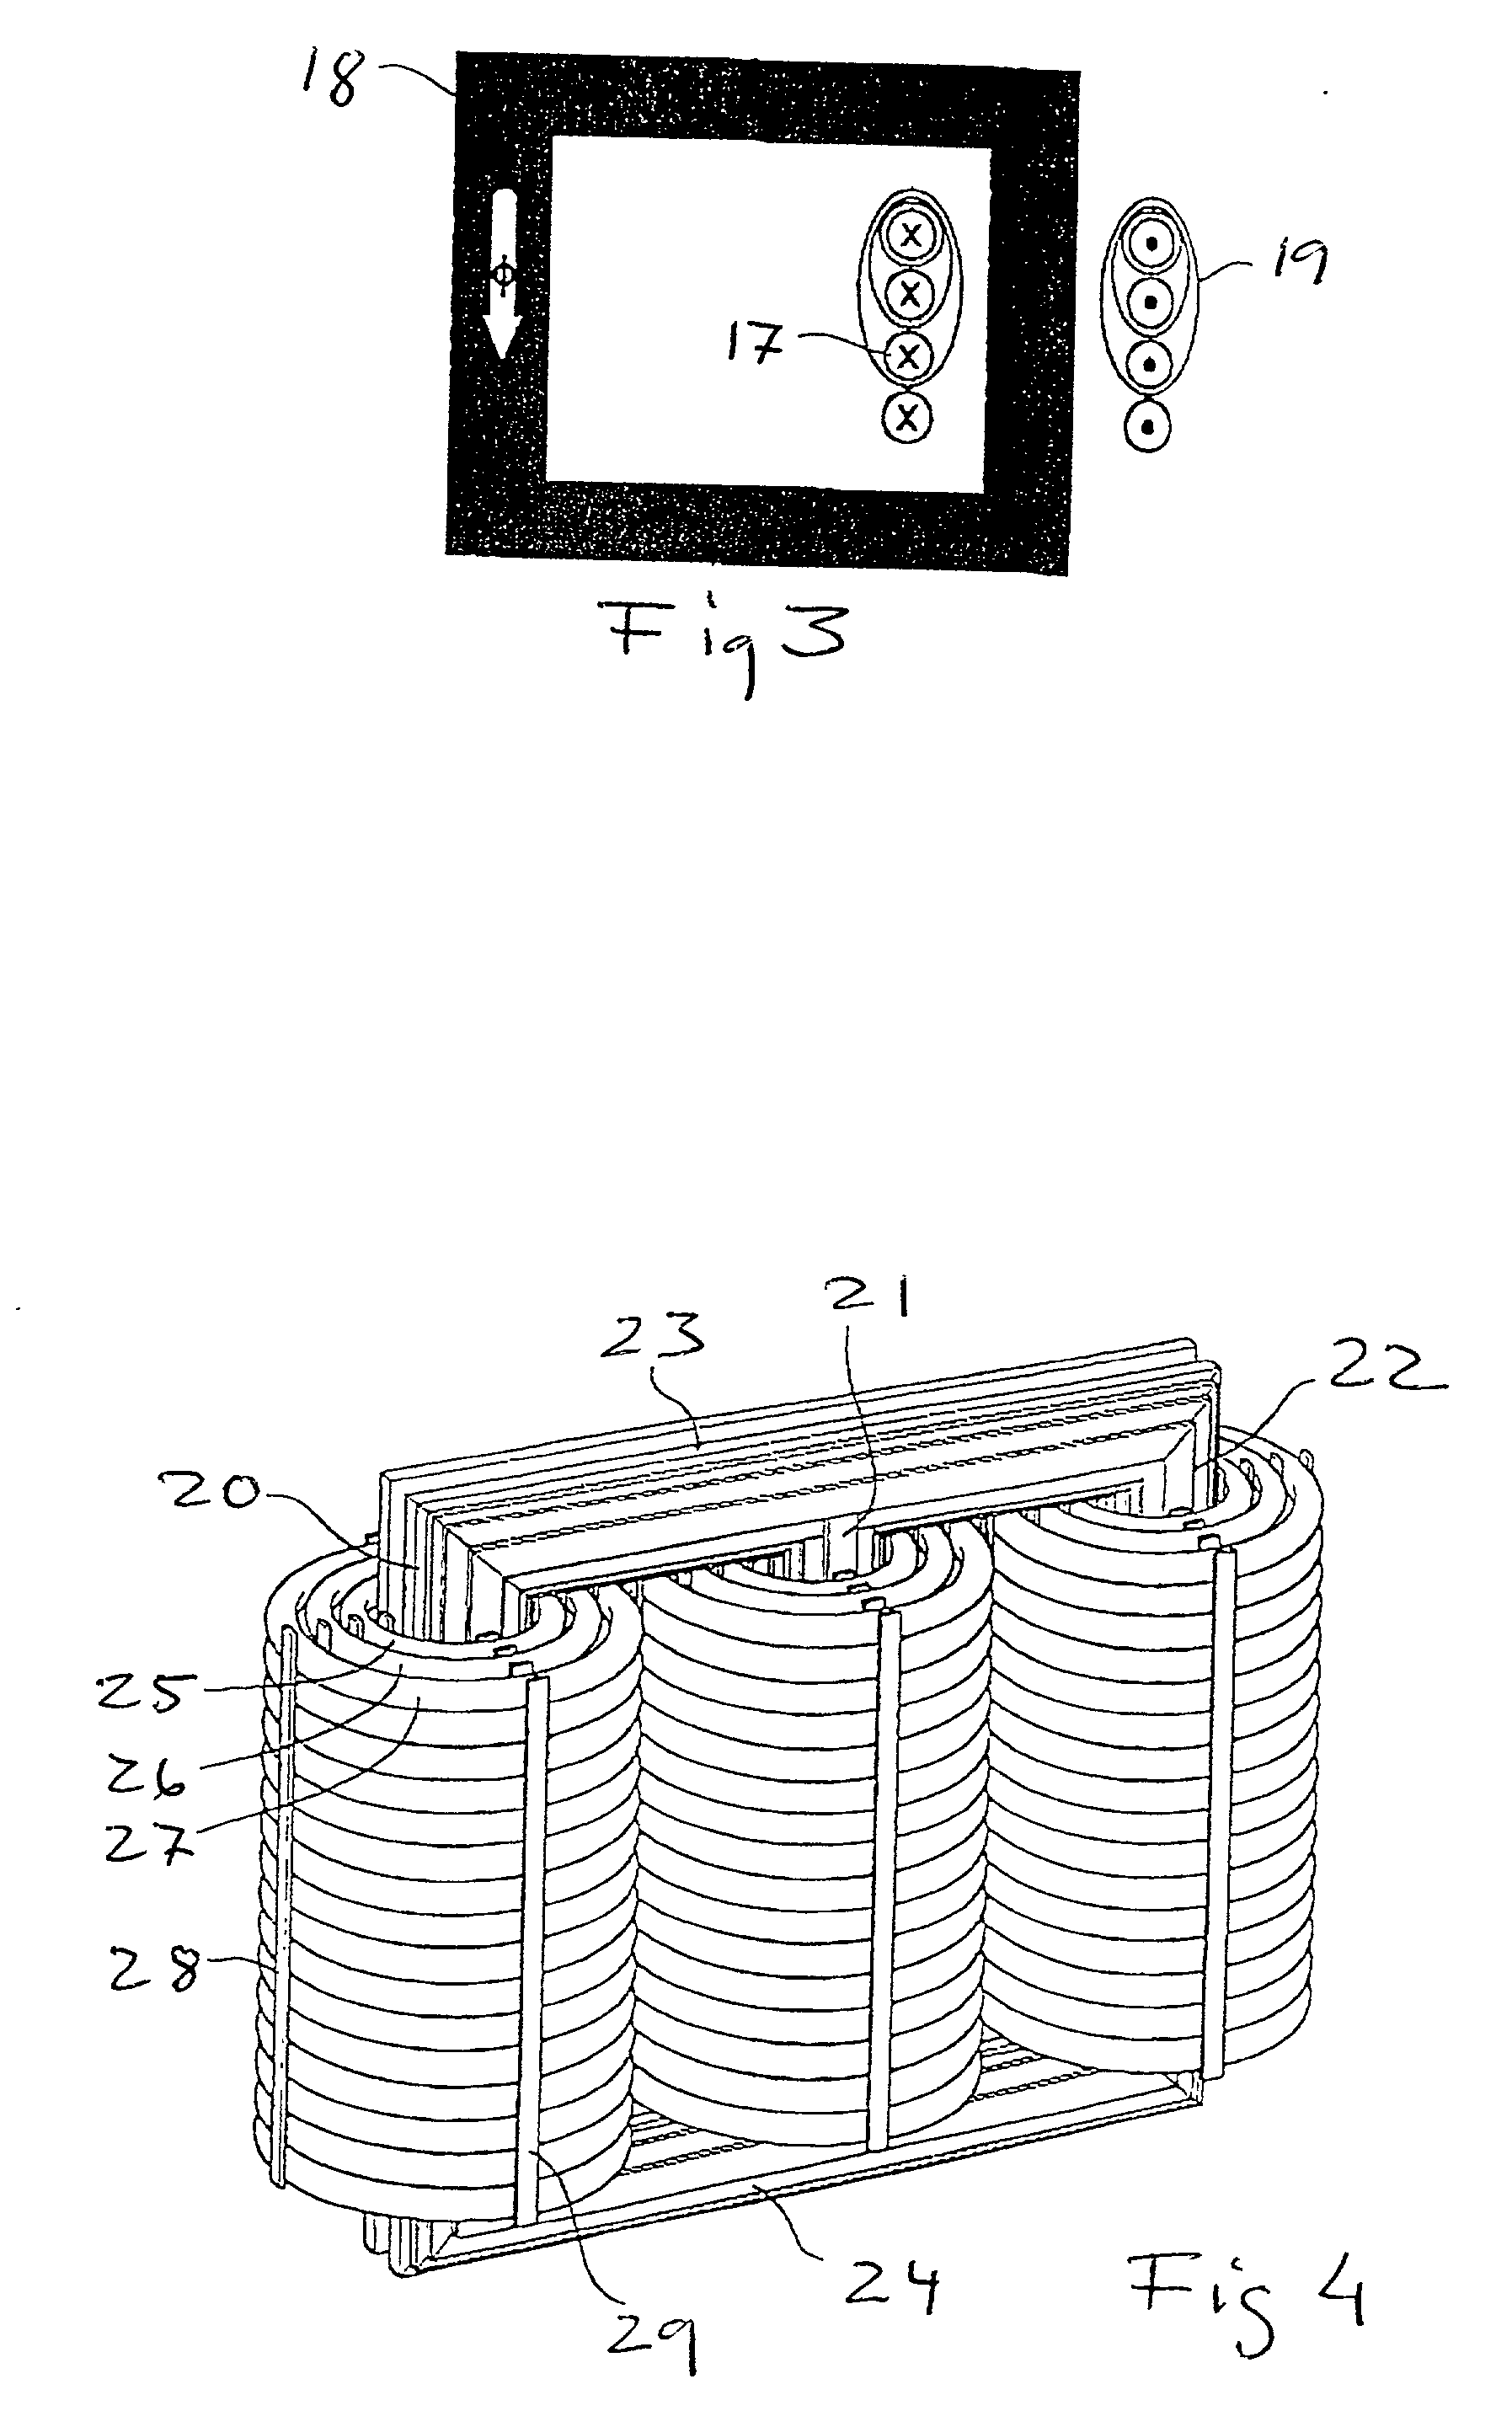 Electromagnetic device